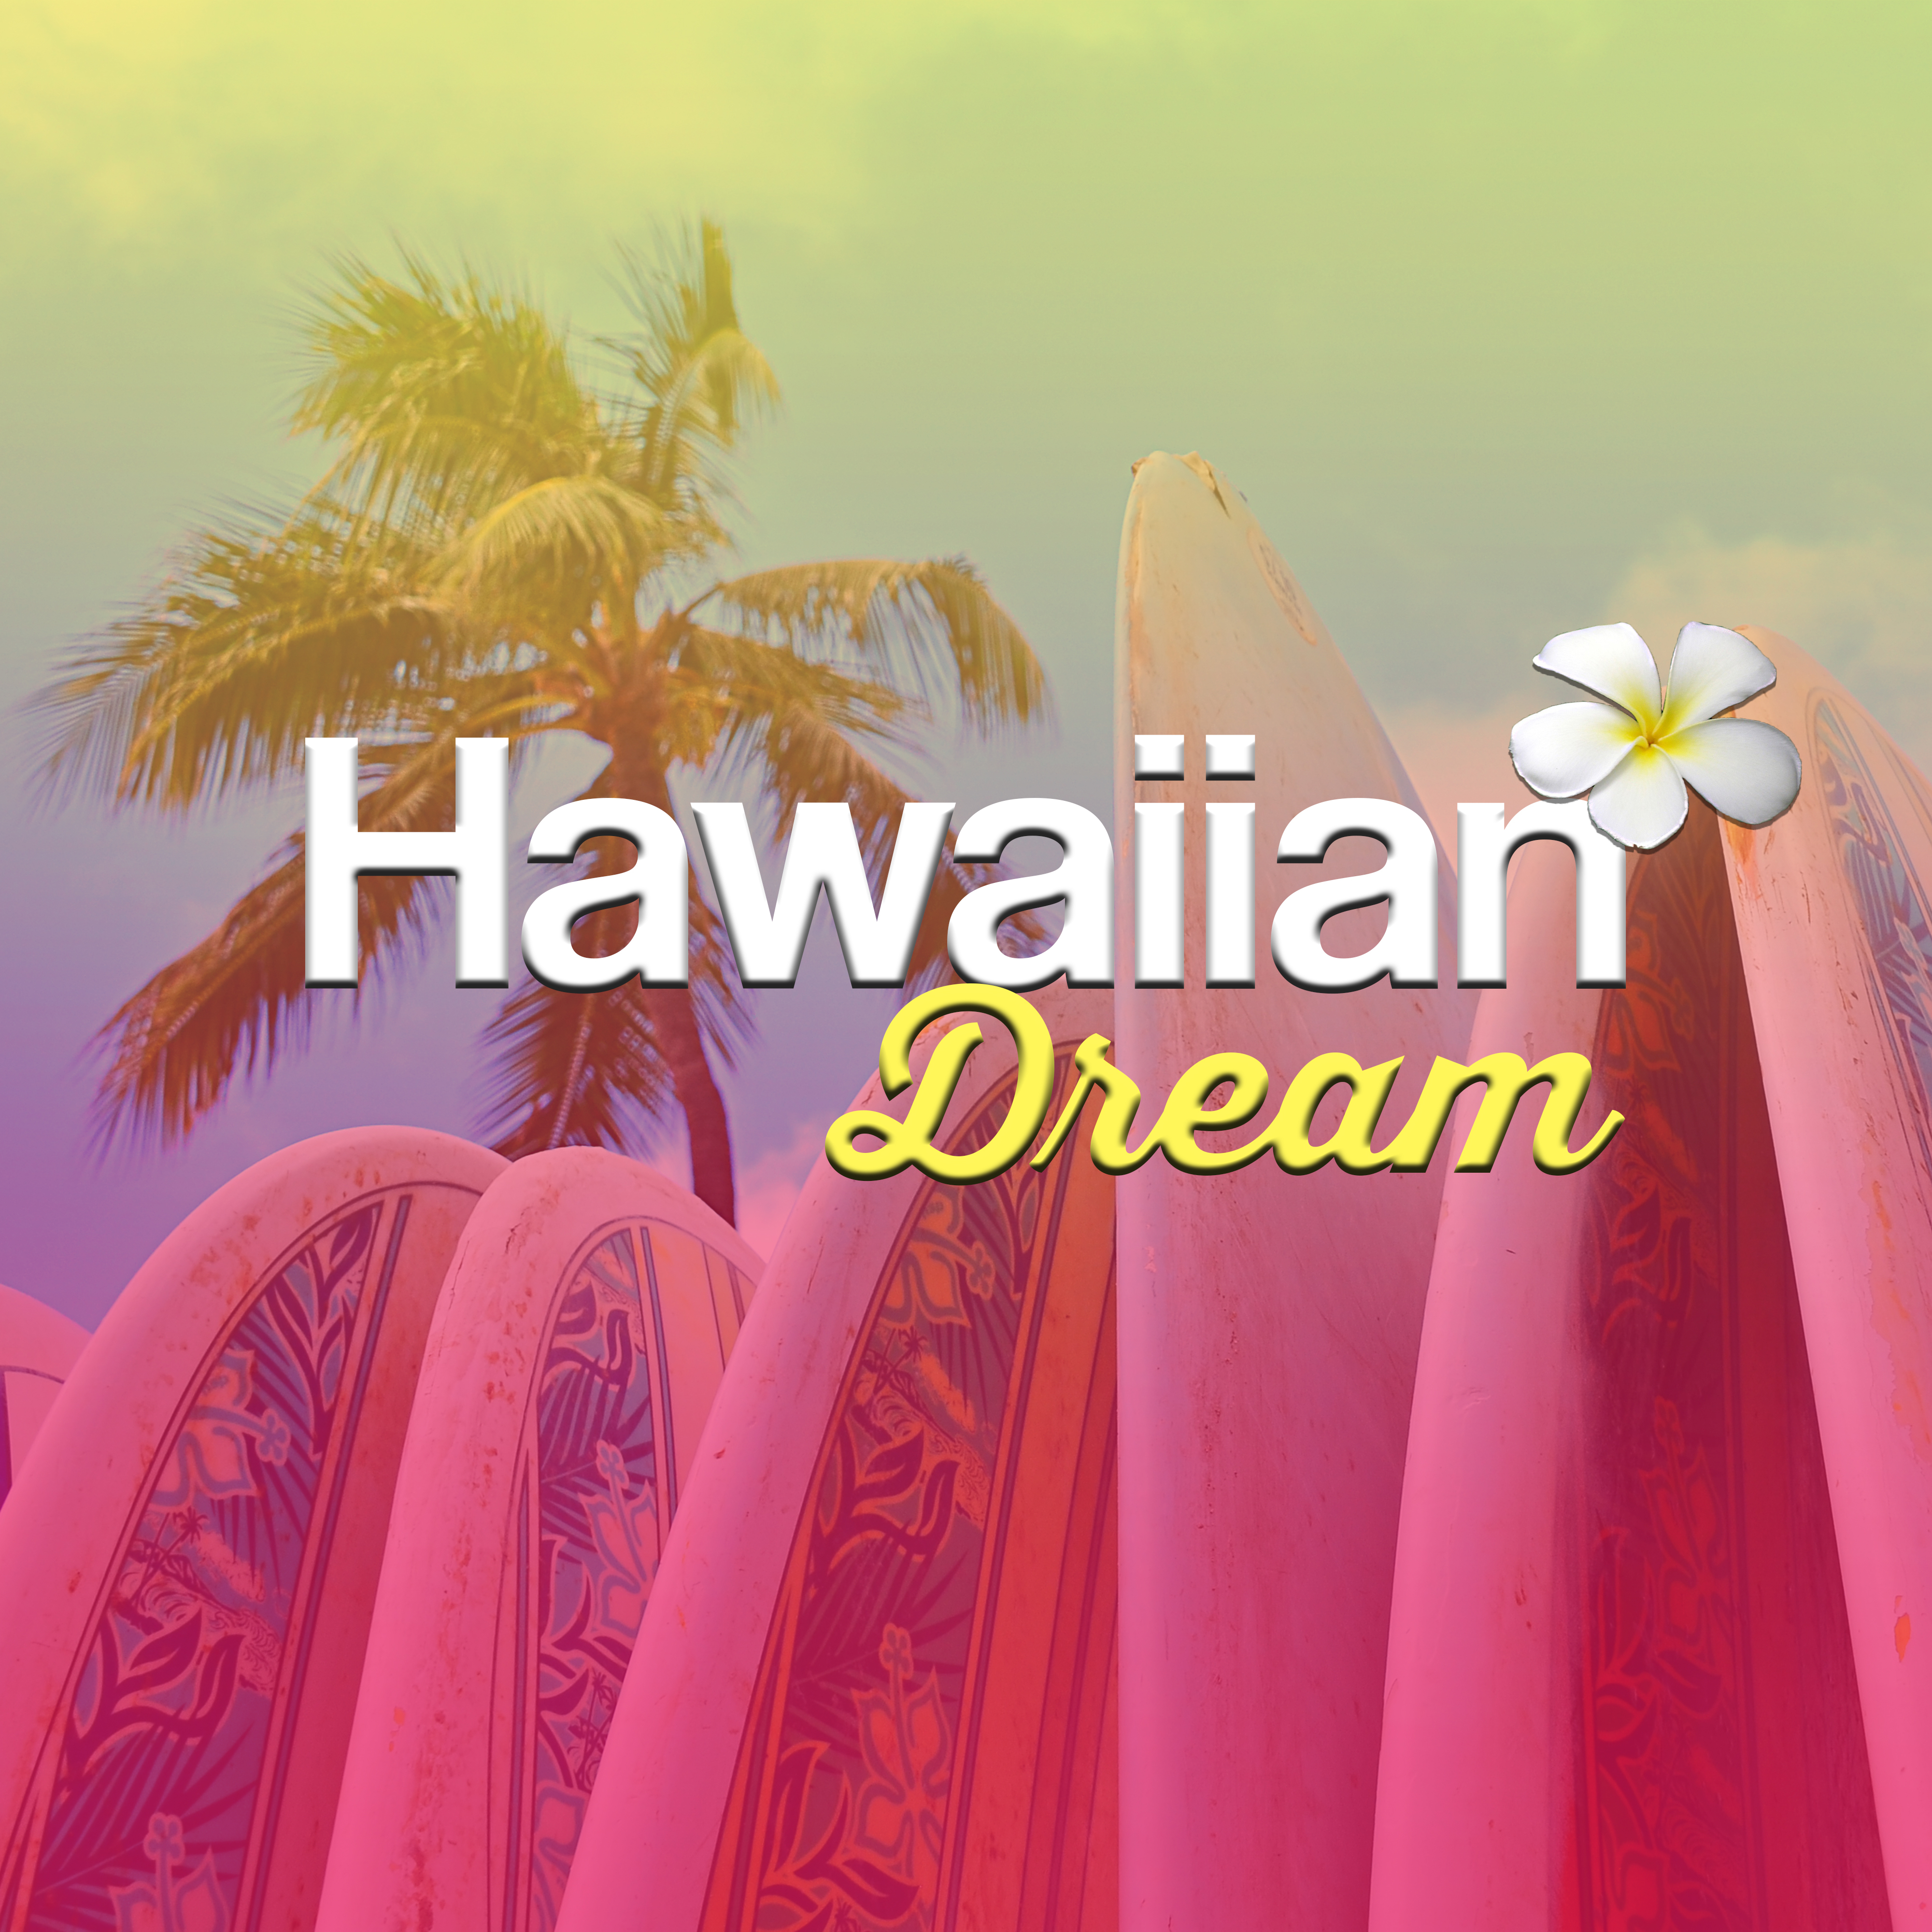 Hawaiian Dream – Chill Paradise, Beach Music, Relaxation, Holiday Chill Out, Drink Bar, Ambient Summer, Rest Under Palms